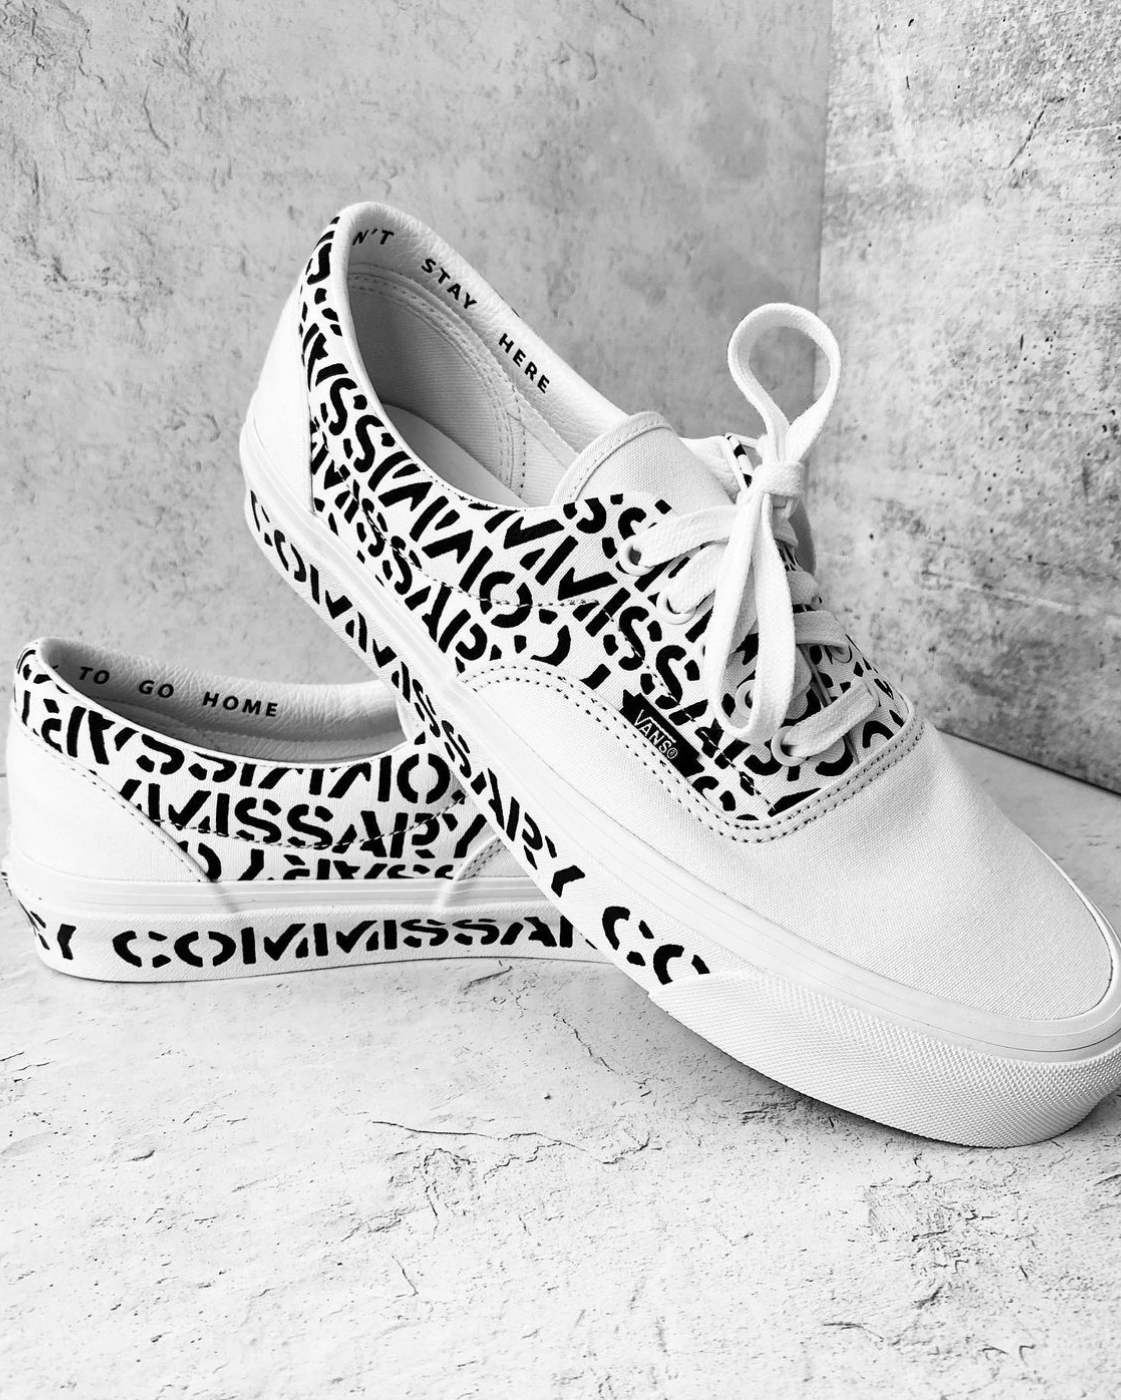 Vans x Commissary – Era 95 DX (White/Black) (Auction For Commissary Lounge  on 4.8.21) @commissarystore - Under The Palms